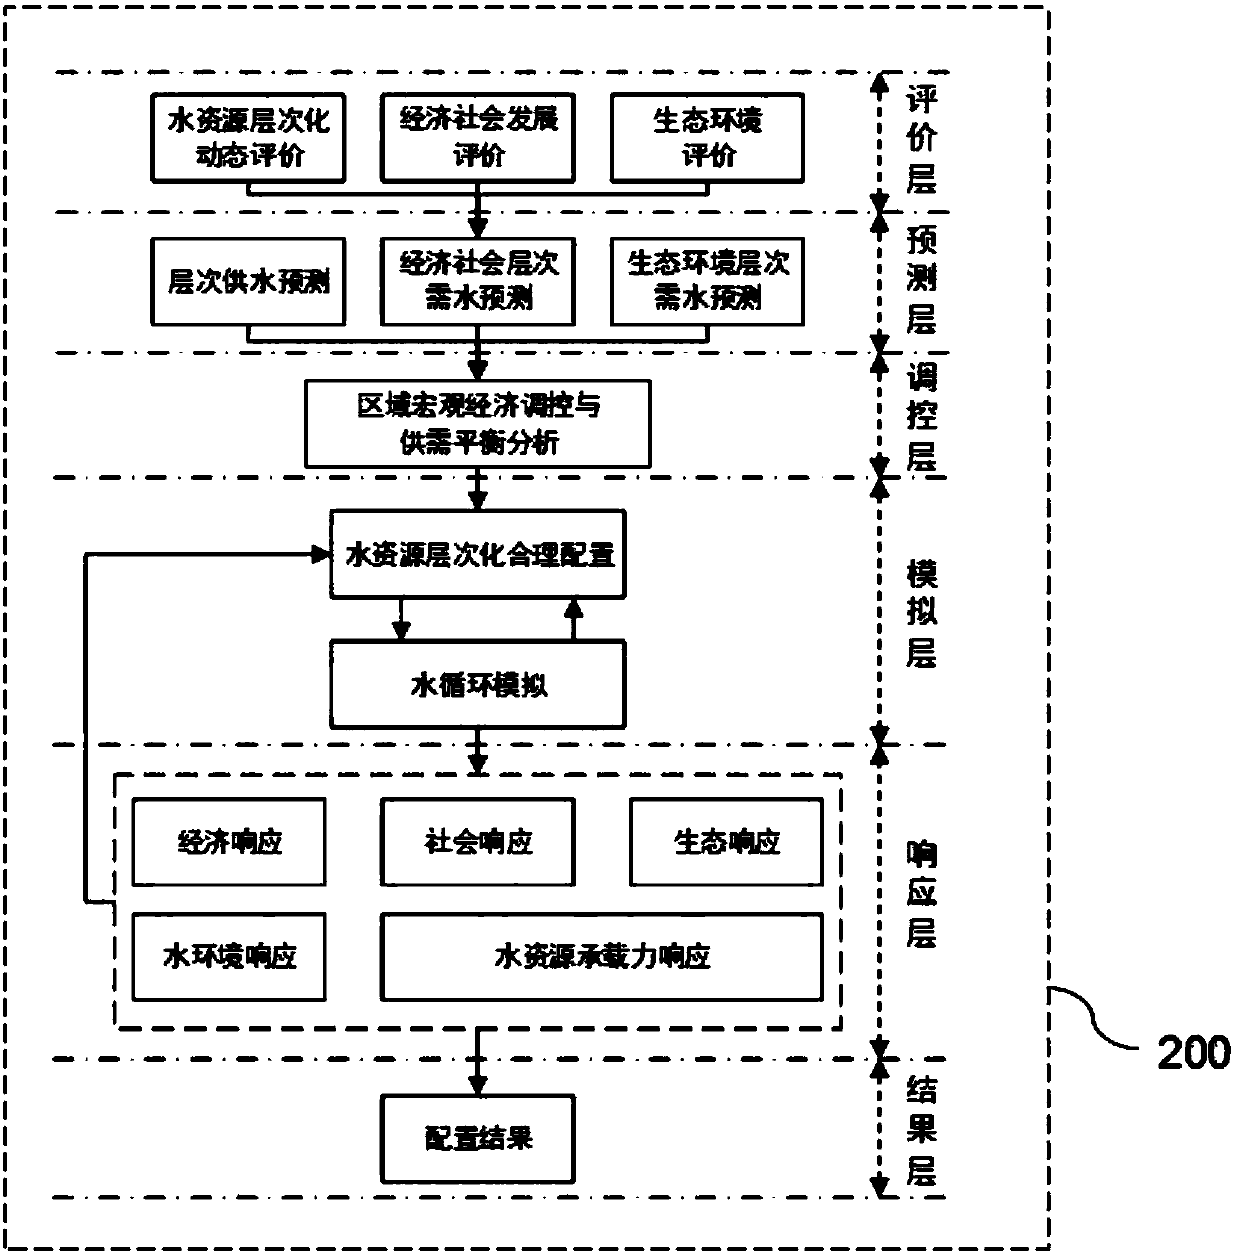 Hierarchical configuration method and configuration model for water resource